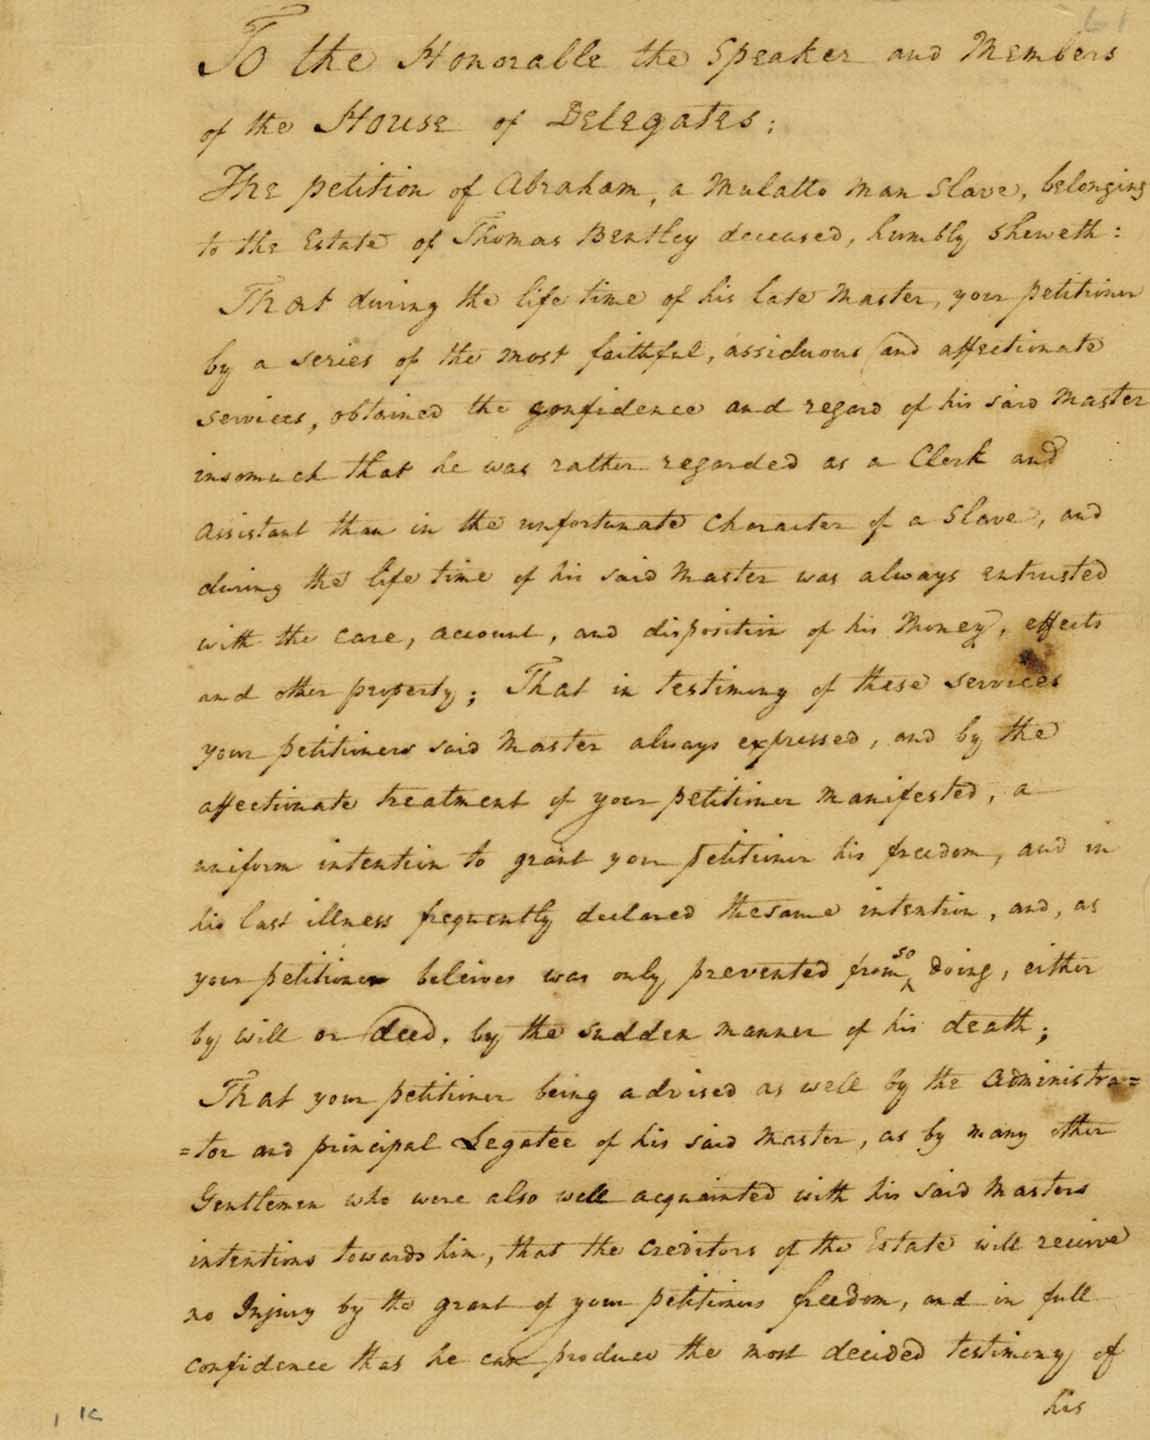 Abraham Skipwith's petition for freedom